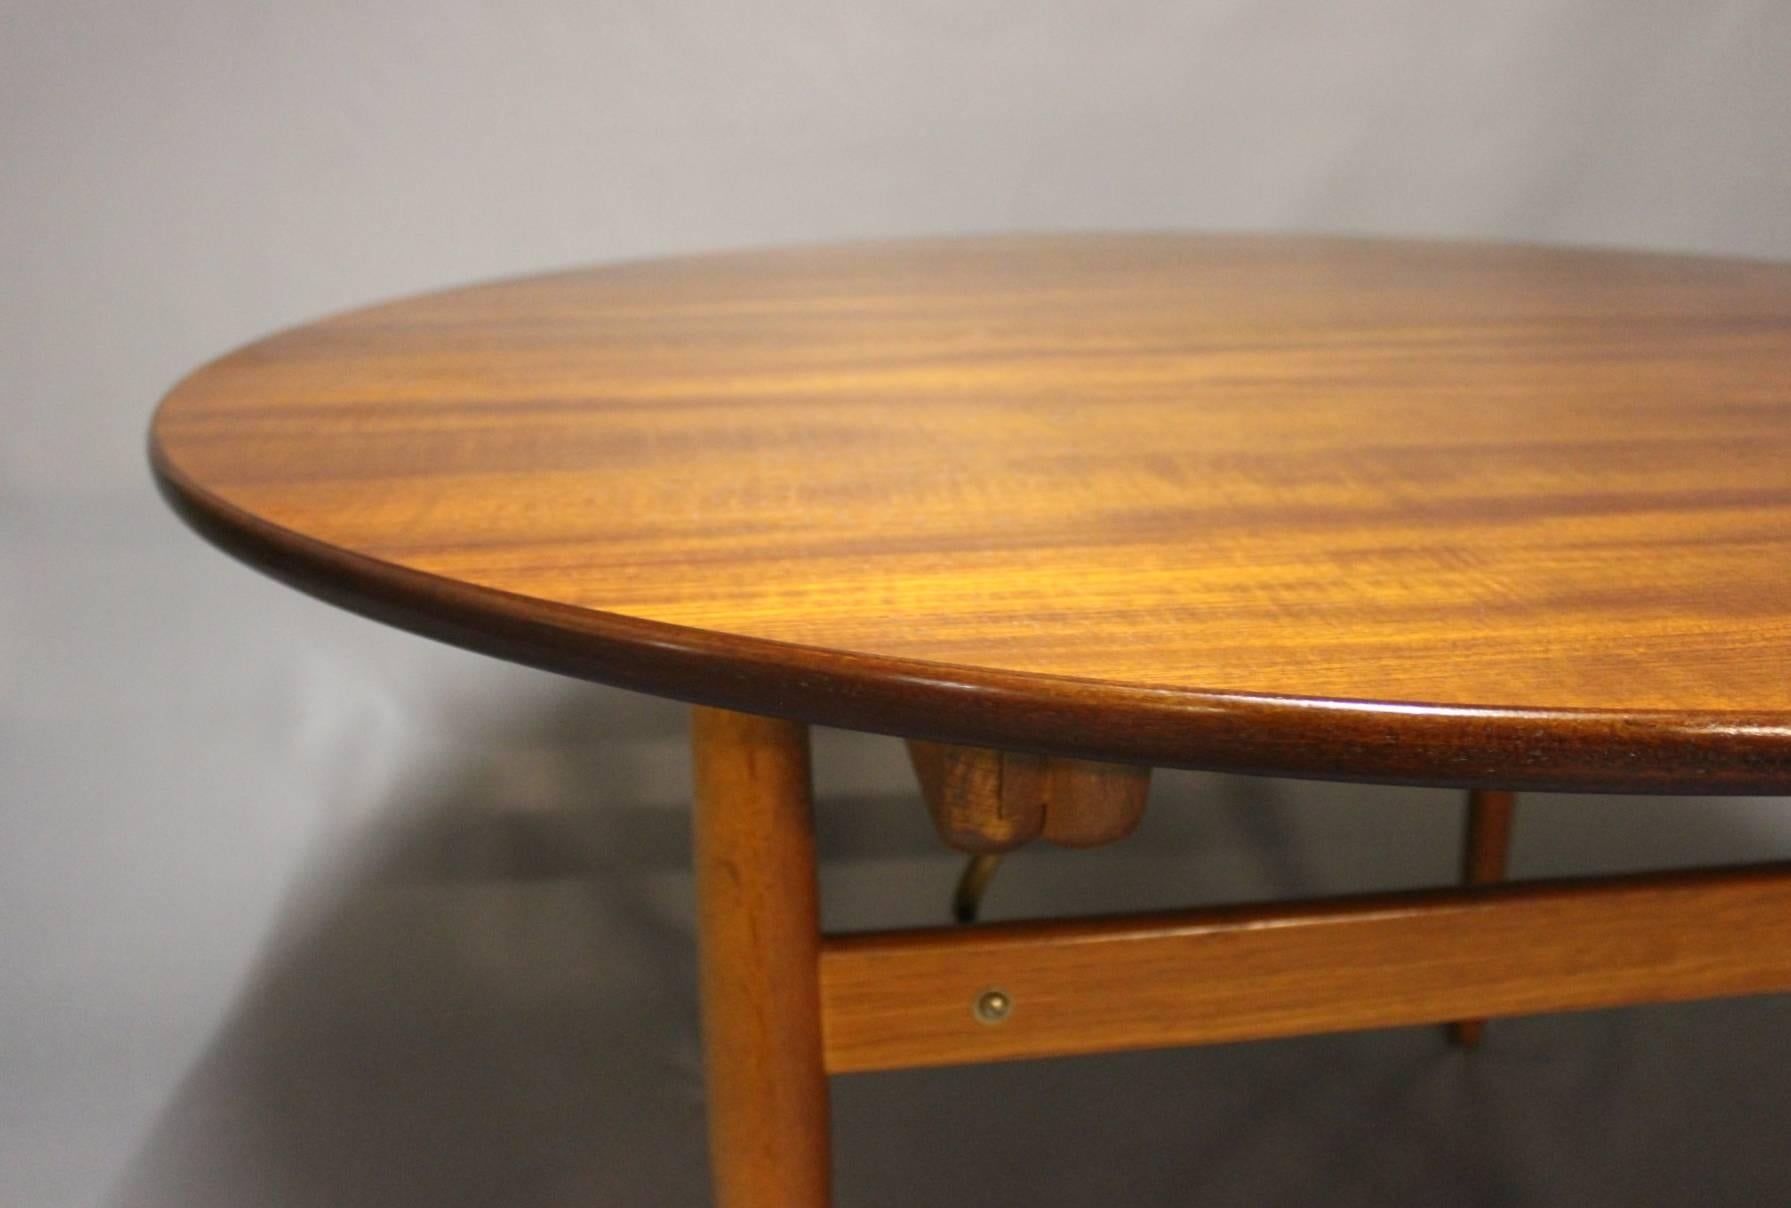 Scandinavian Modern Round Dining Table with Extensions in Teak and Oak by Hans J. Wegner, 1960s